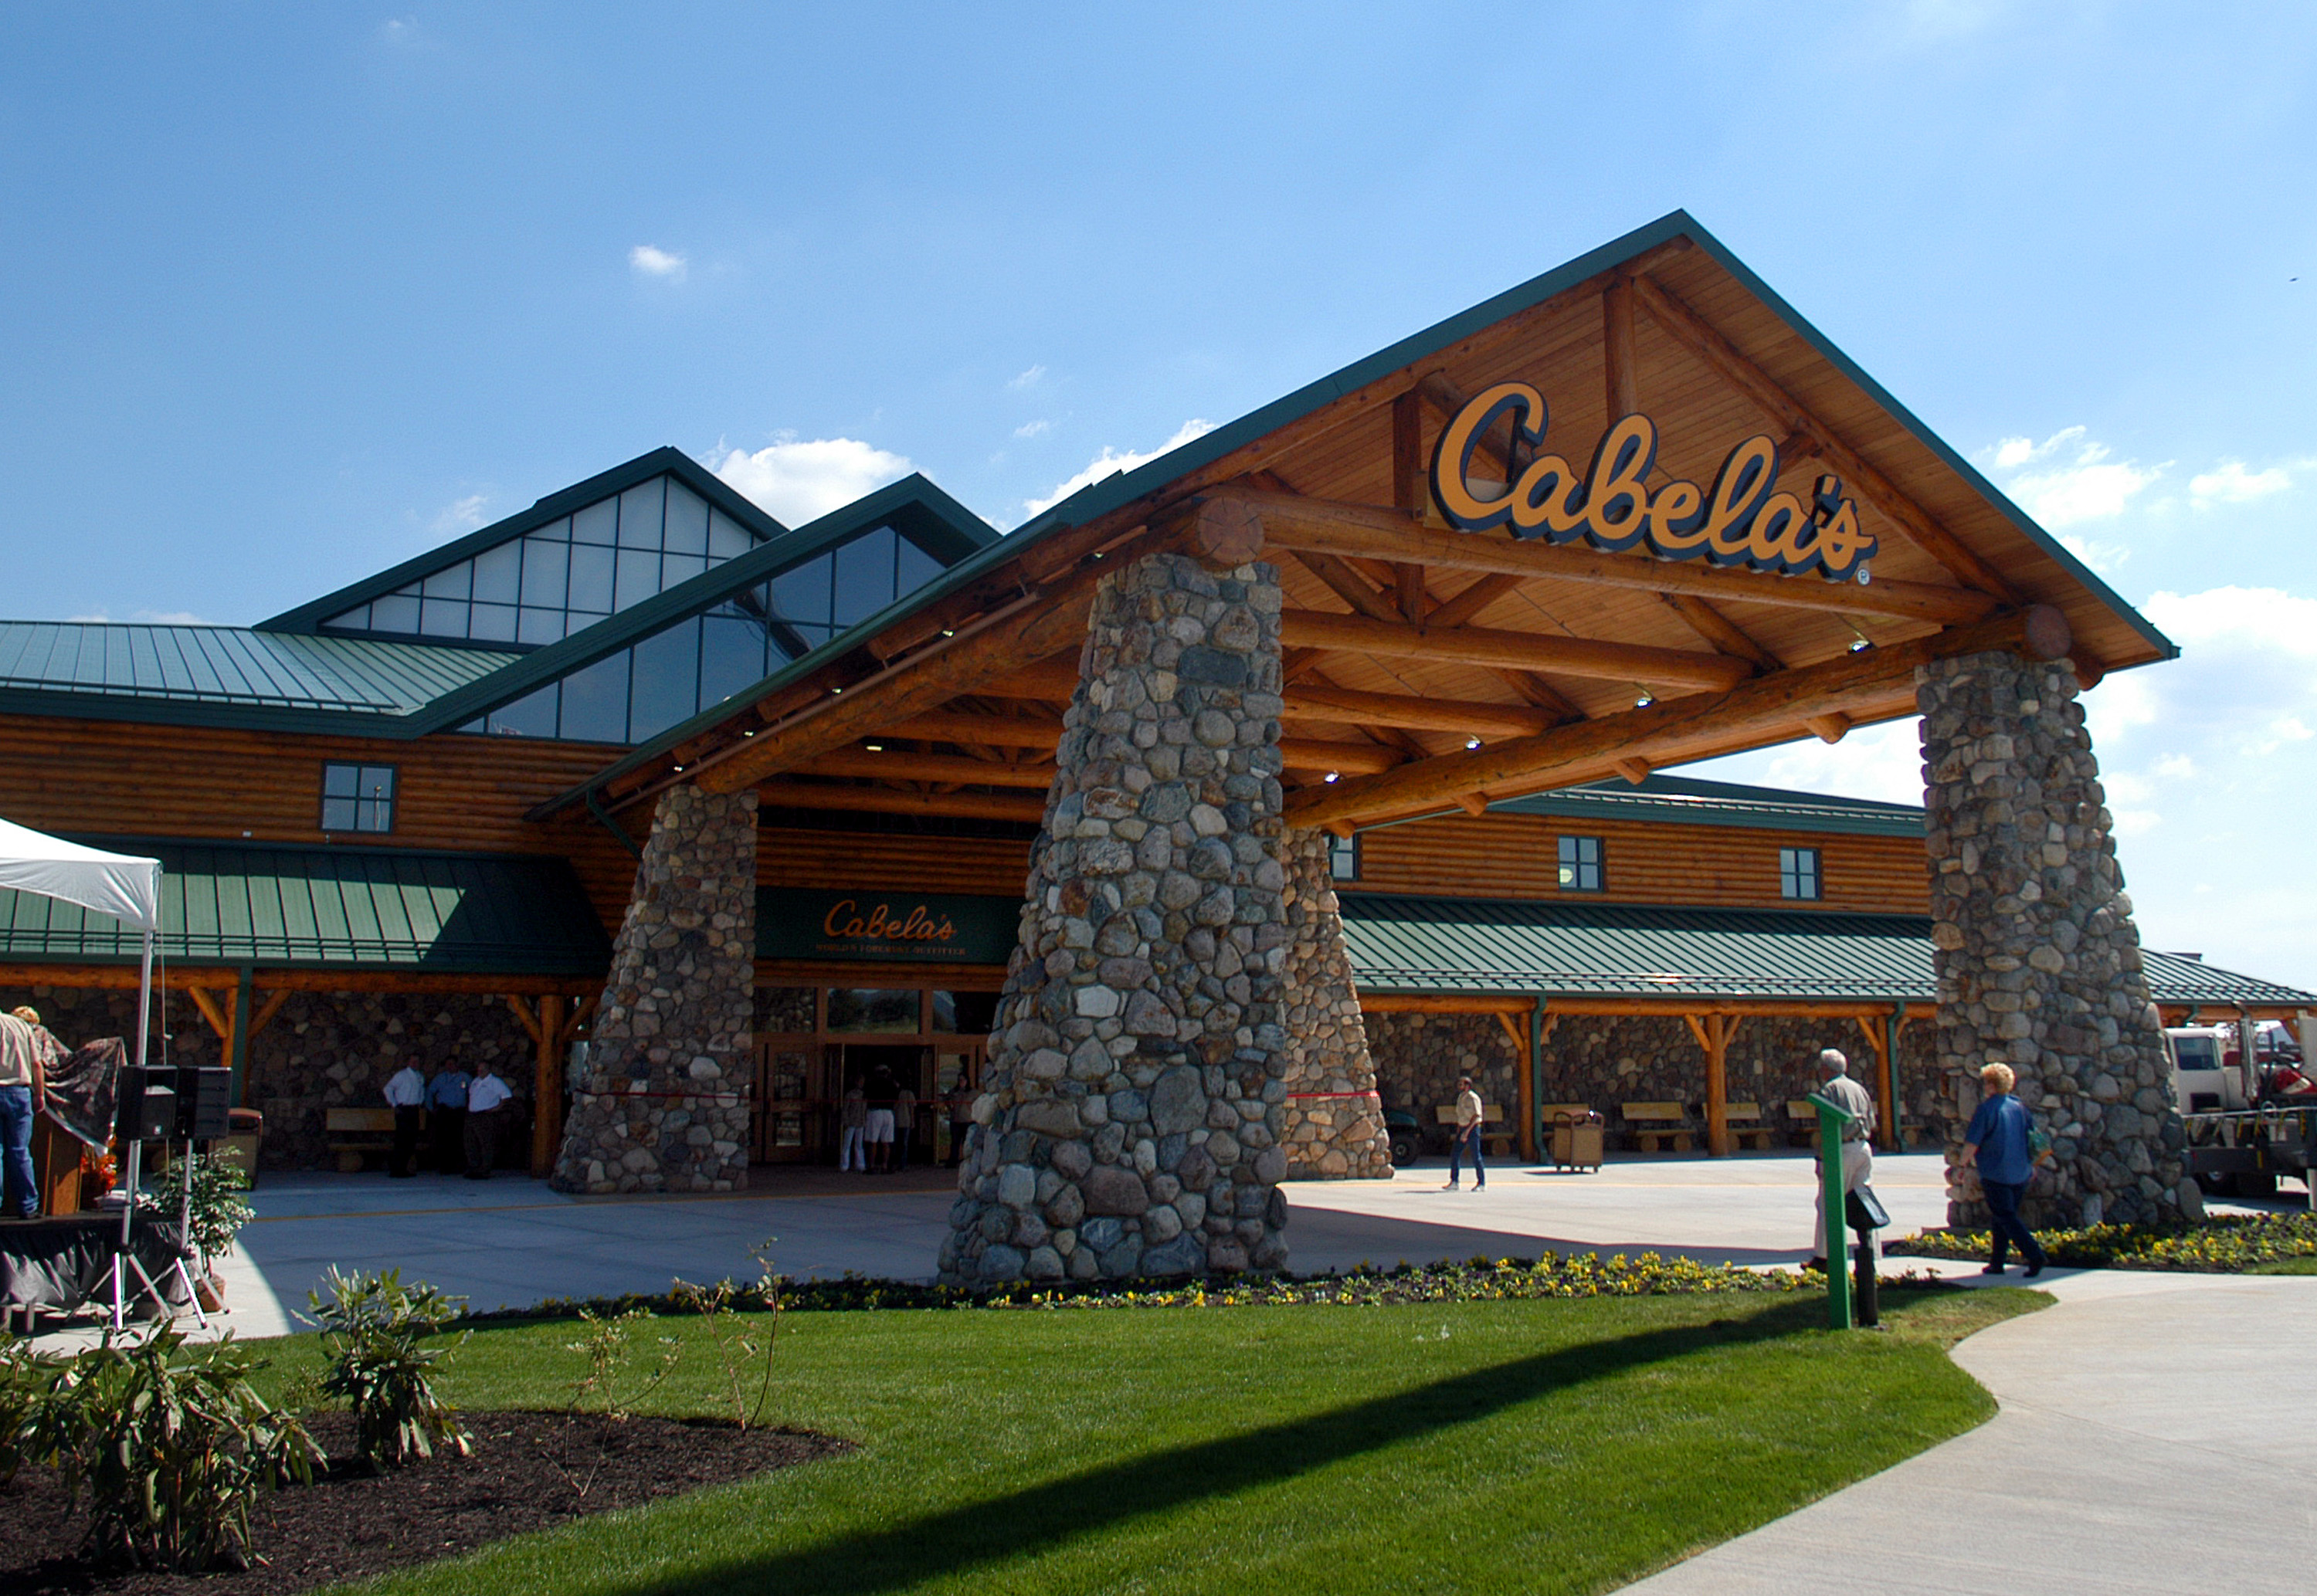 Bass Pro Shops is buying Cabelas